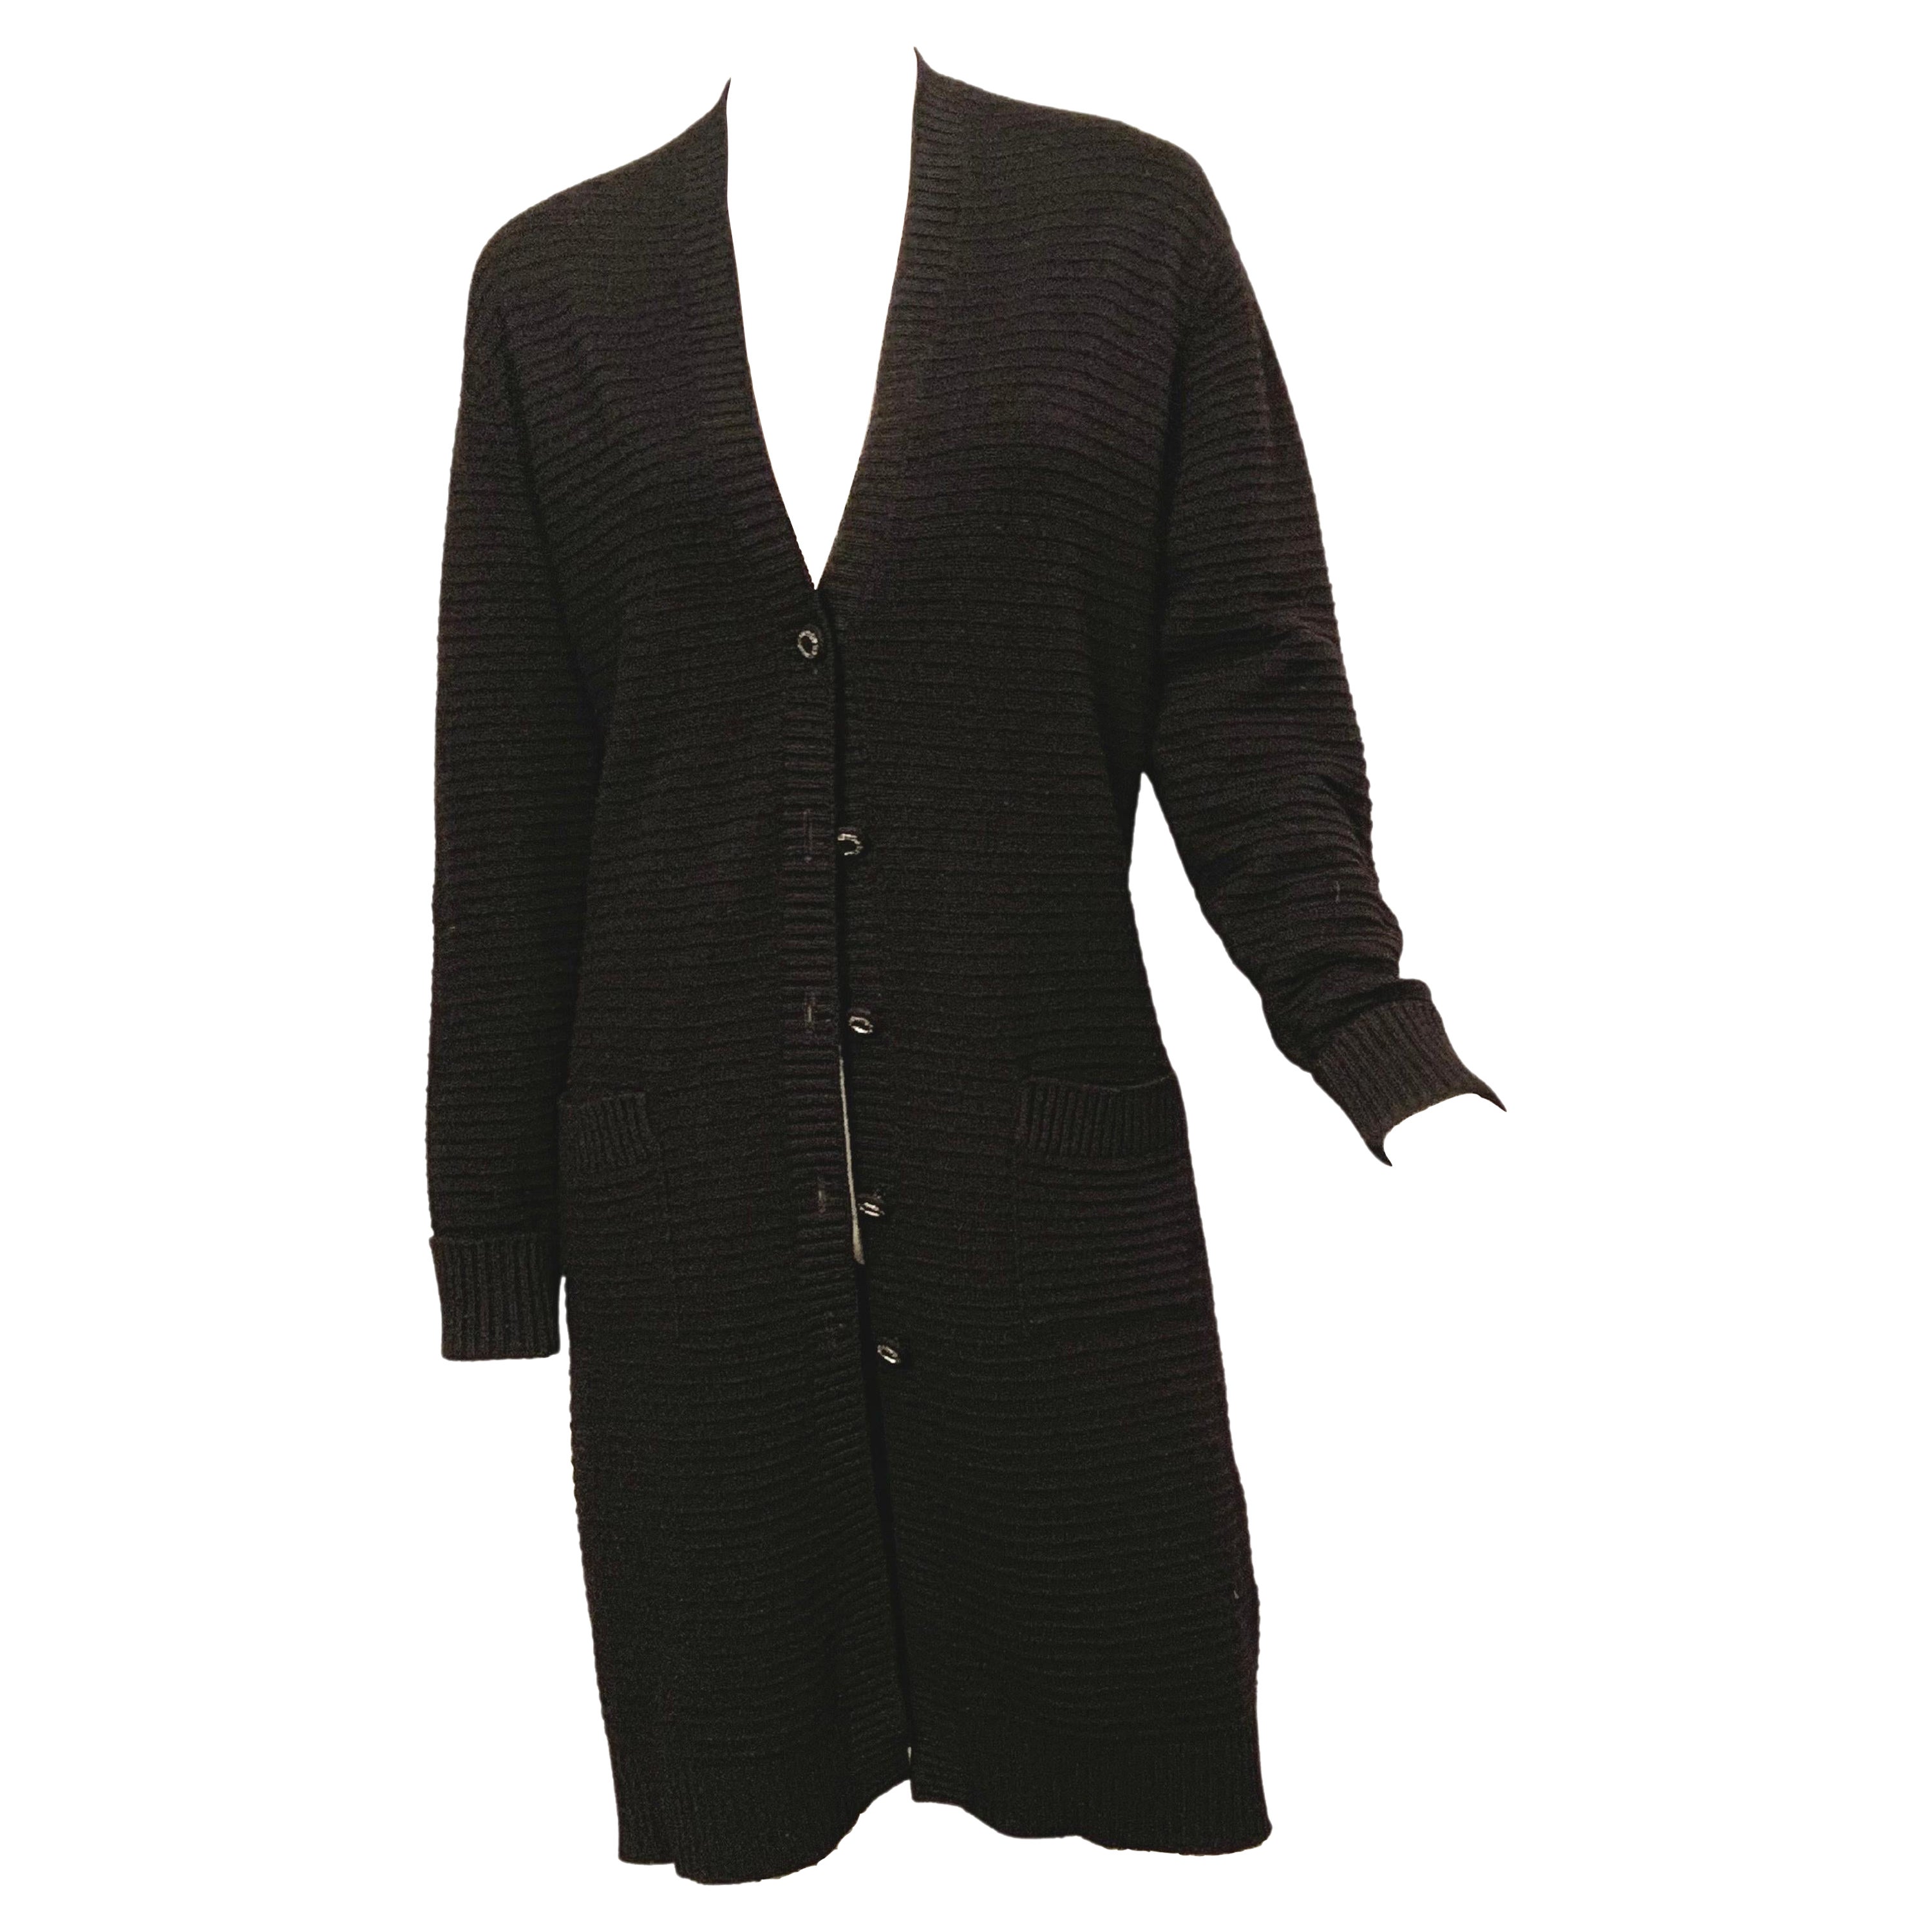 Chanel Black Cashmere Long Cardigan Sweater, Larger Size